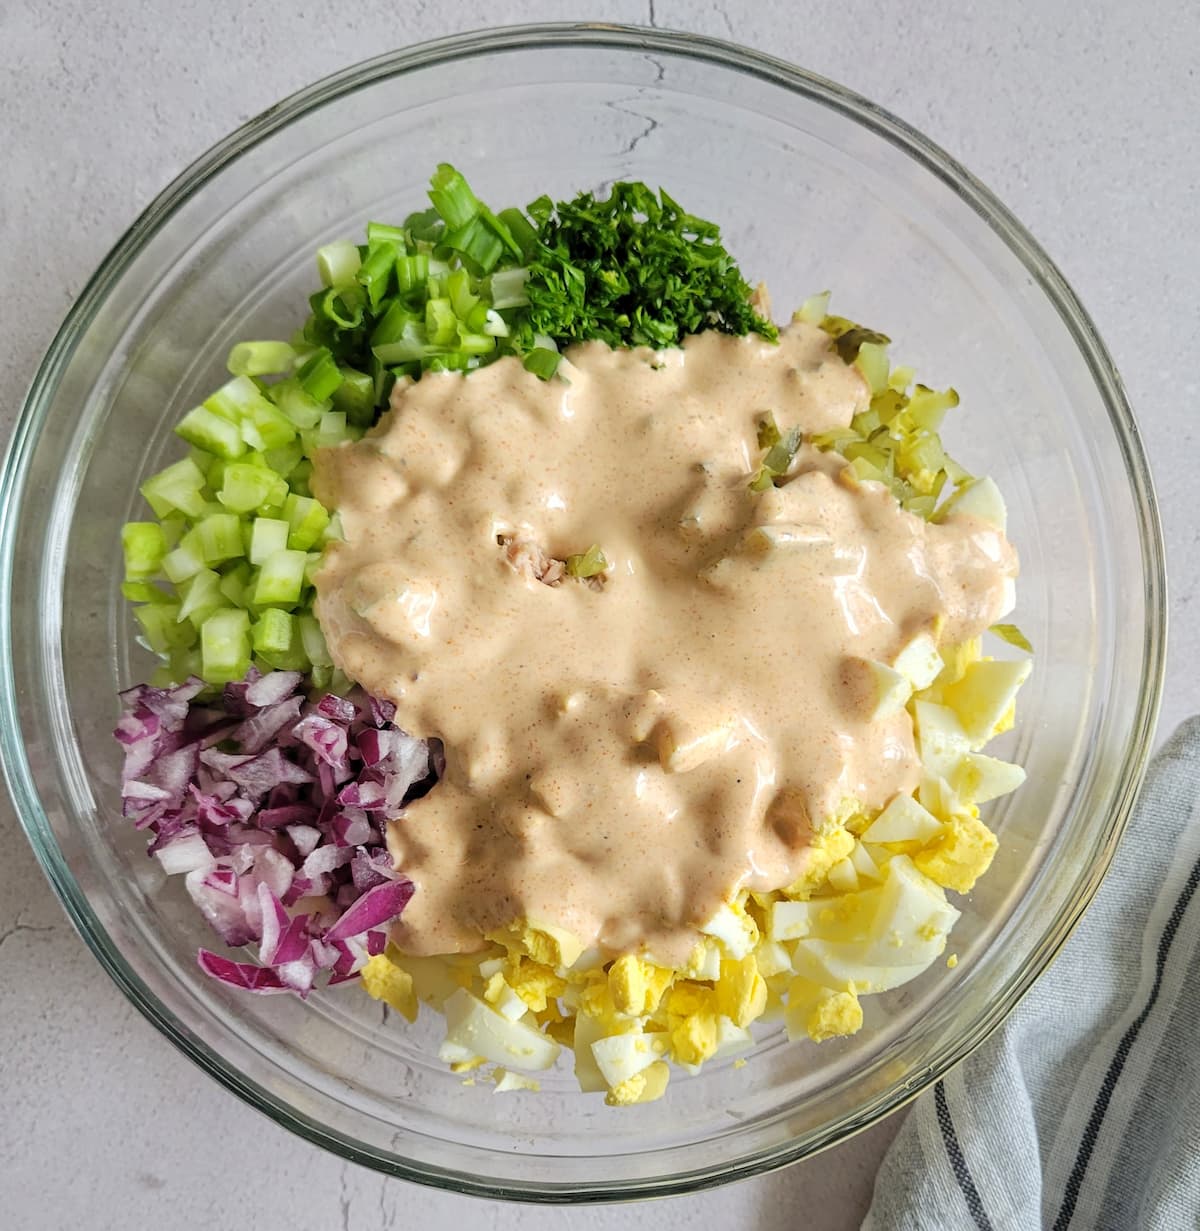 diced celery, red onion, green onion, parsley and chopped hard boiled eggs unmixed in a bowl topped with a creamy sauce